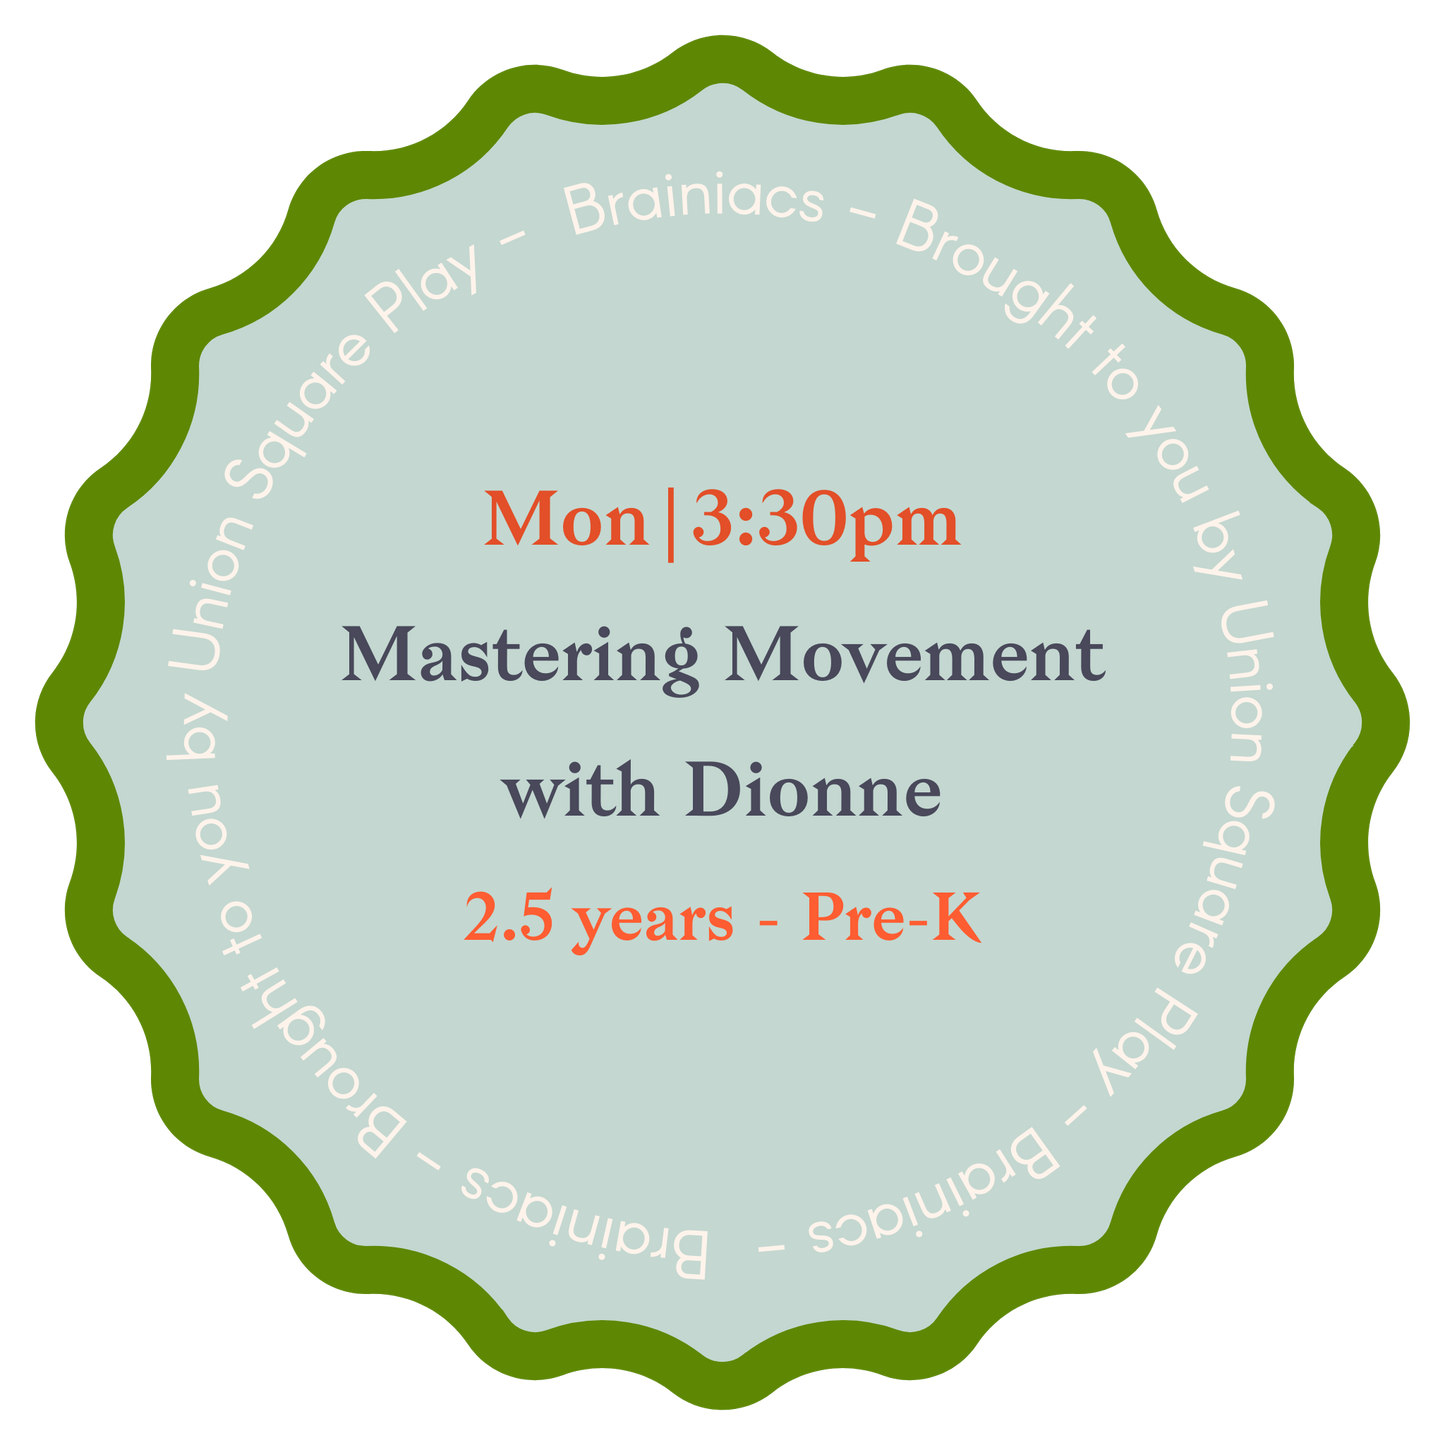 Mastering Movement with Dionne - 2.5 years - Pre-K